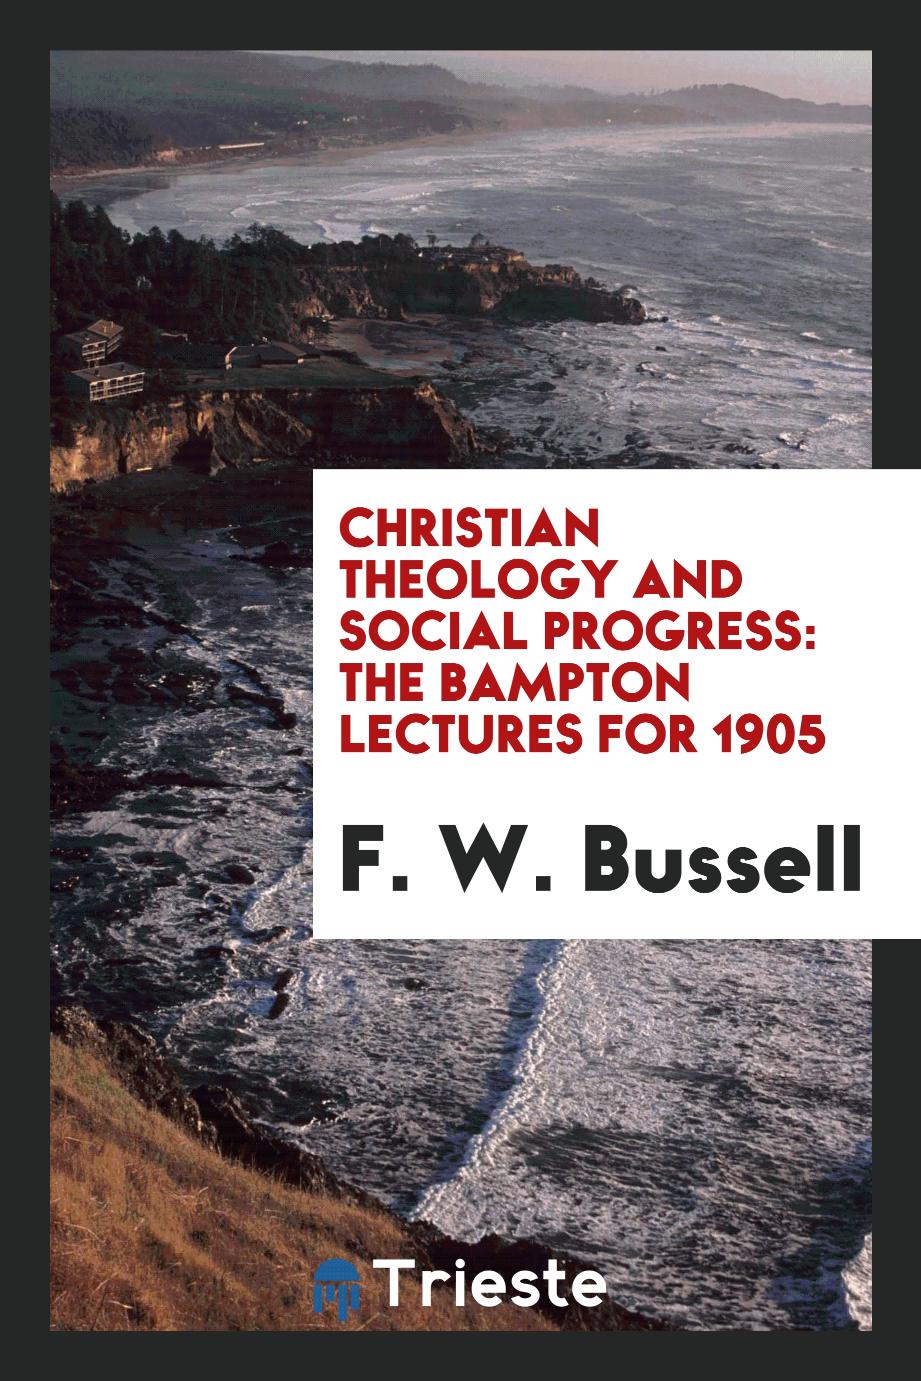 Christian Theology and Social Progress: The Bampton Lectures for 1905